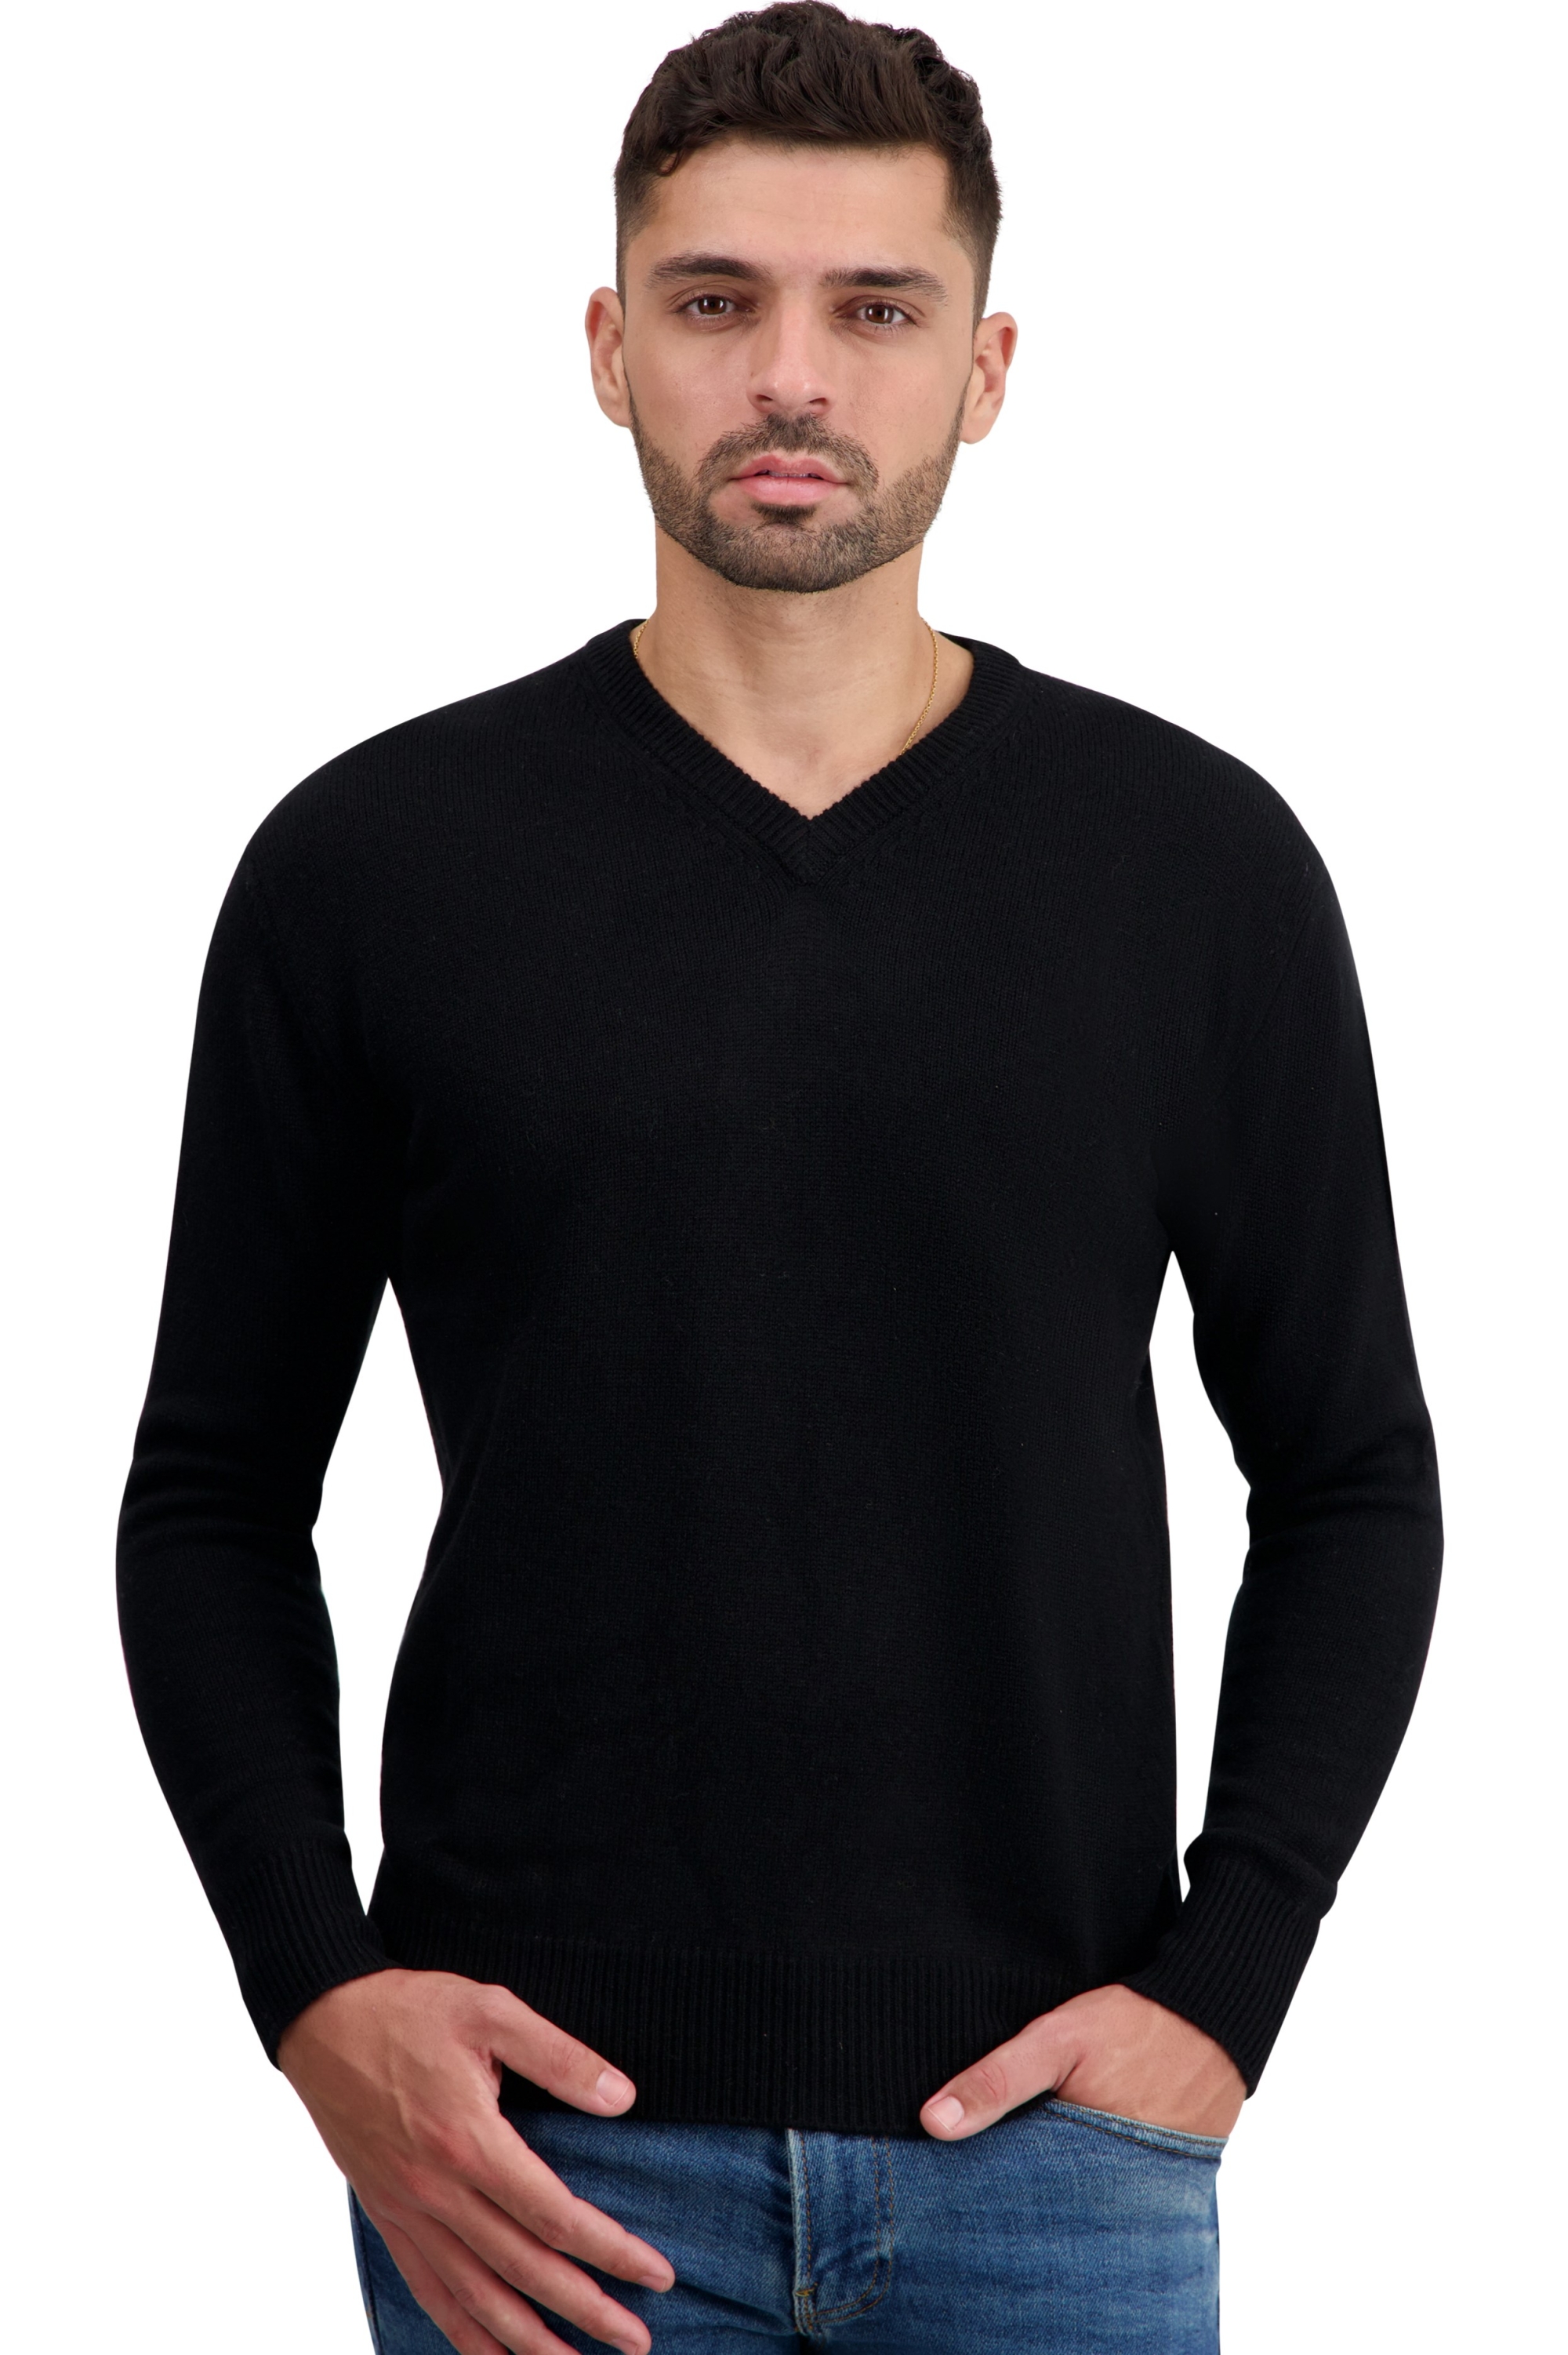 Cachemire pull homme col v tour first noir m